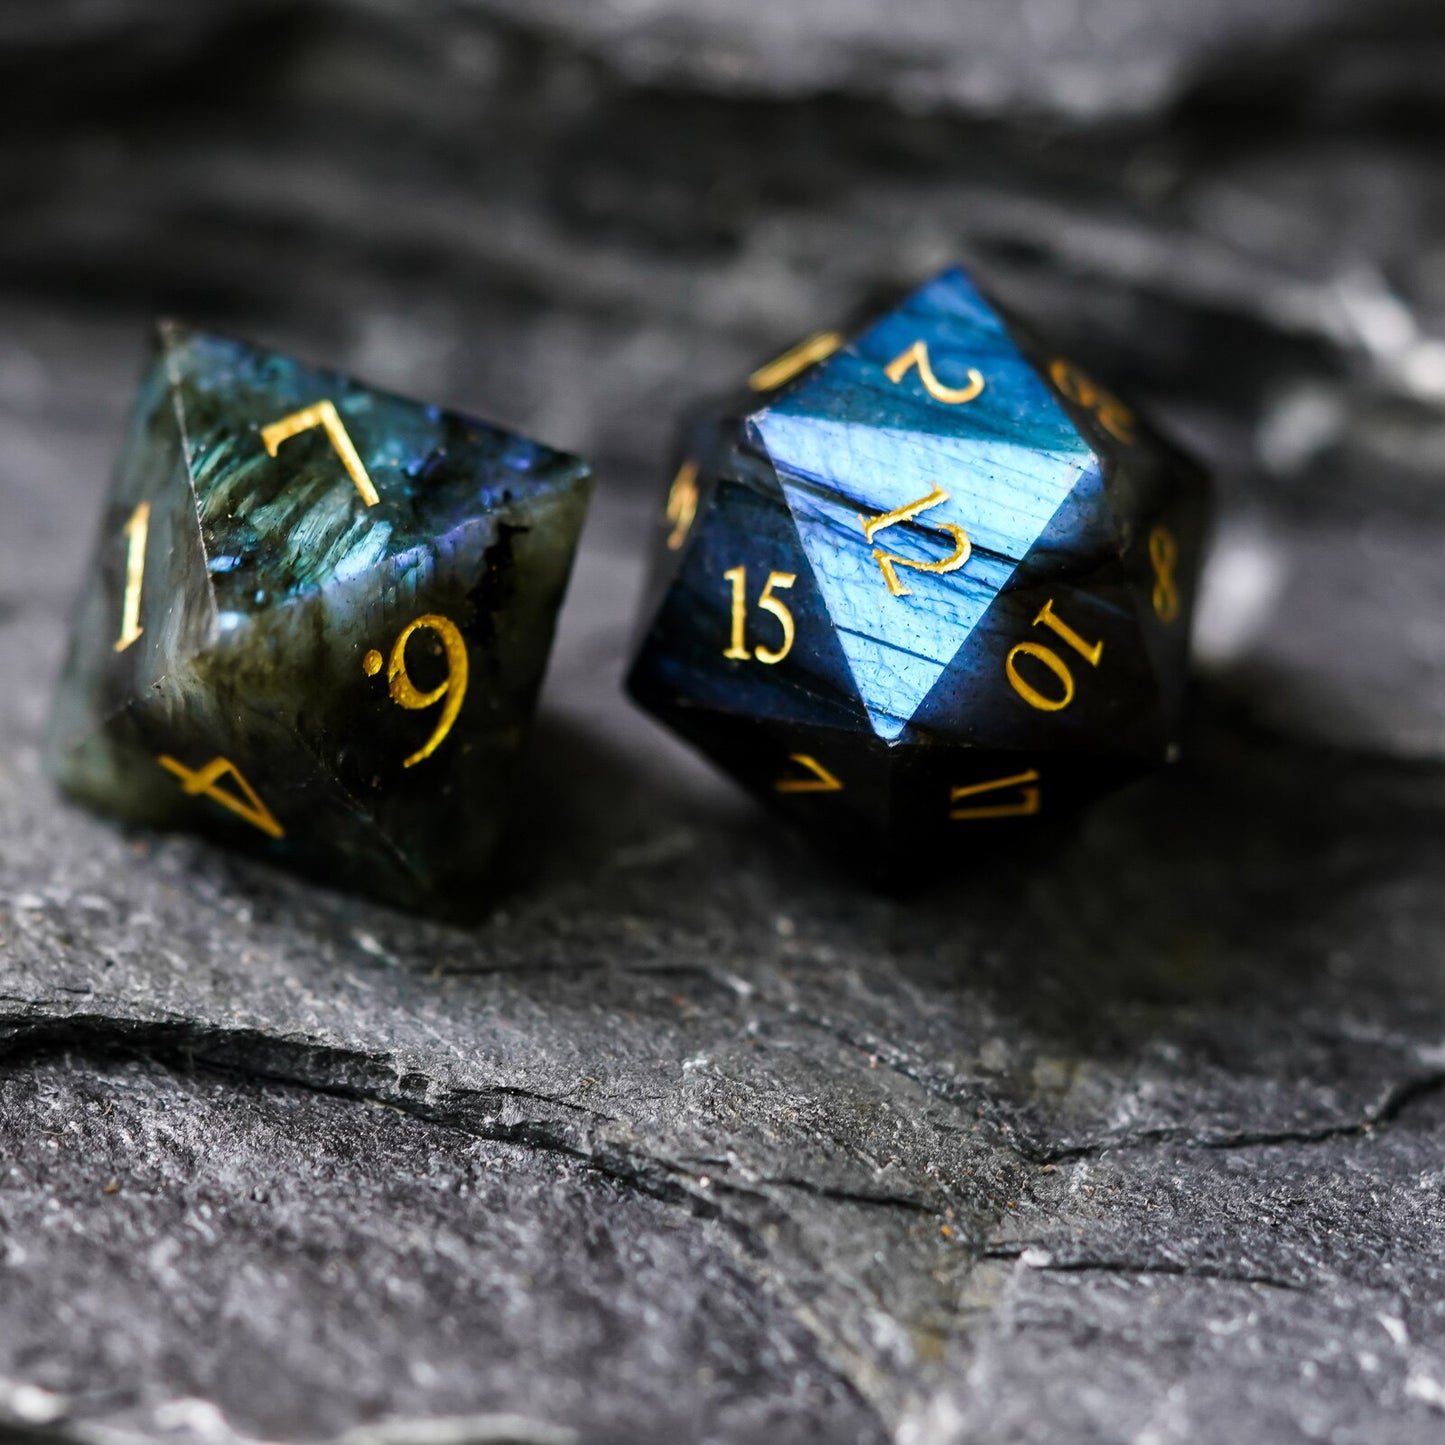 d20 and d8 dice highlight